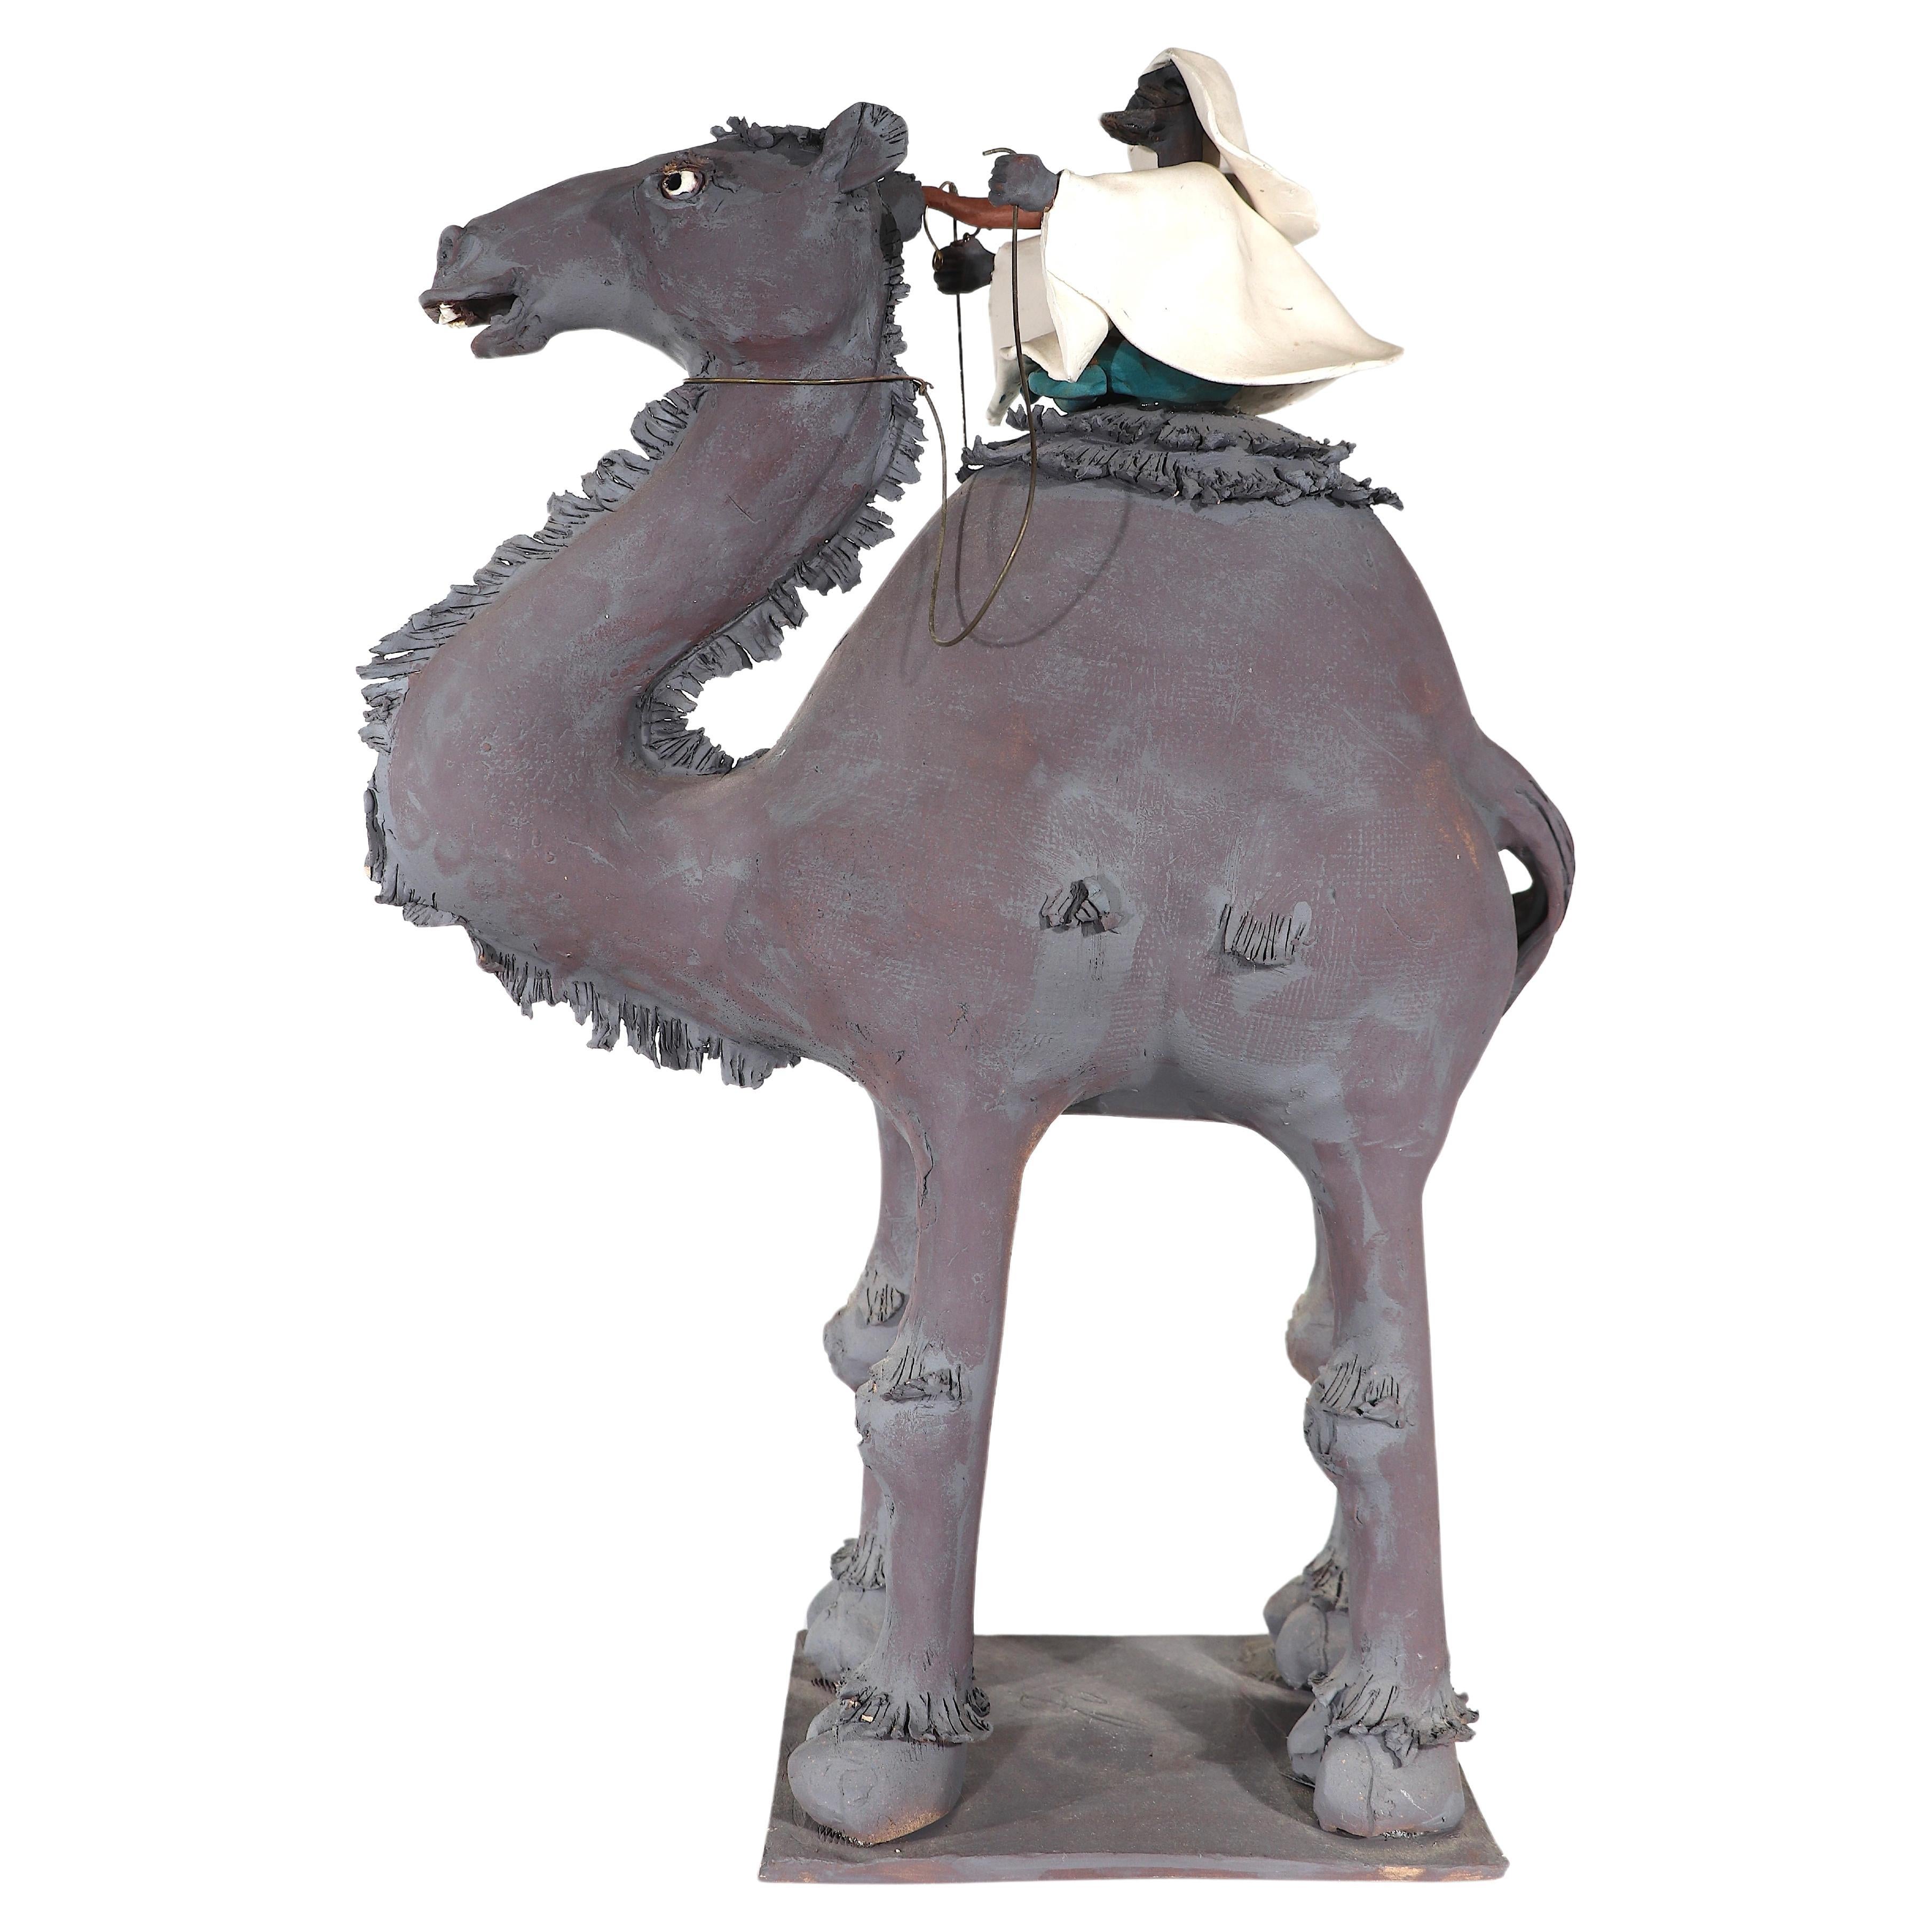 Brutalist Art Pottery Studio  Sculpture Man with Gun Riding a Camel signed  For Sale